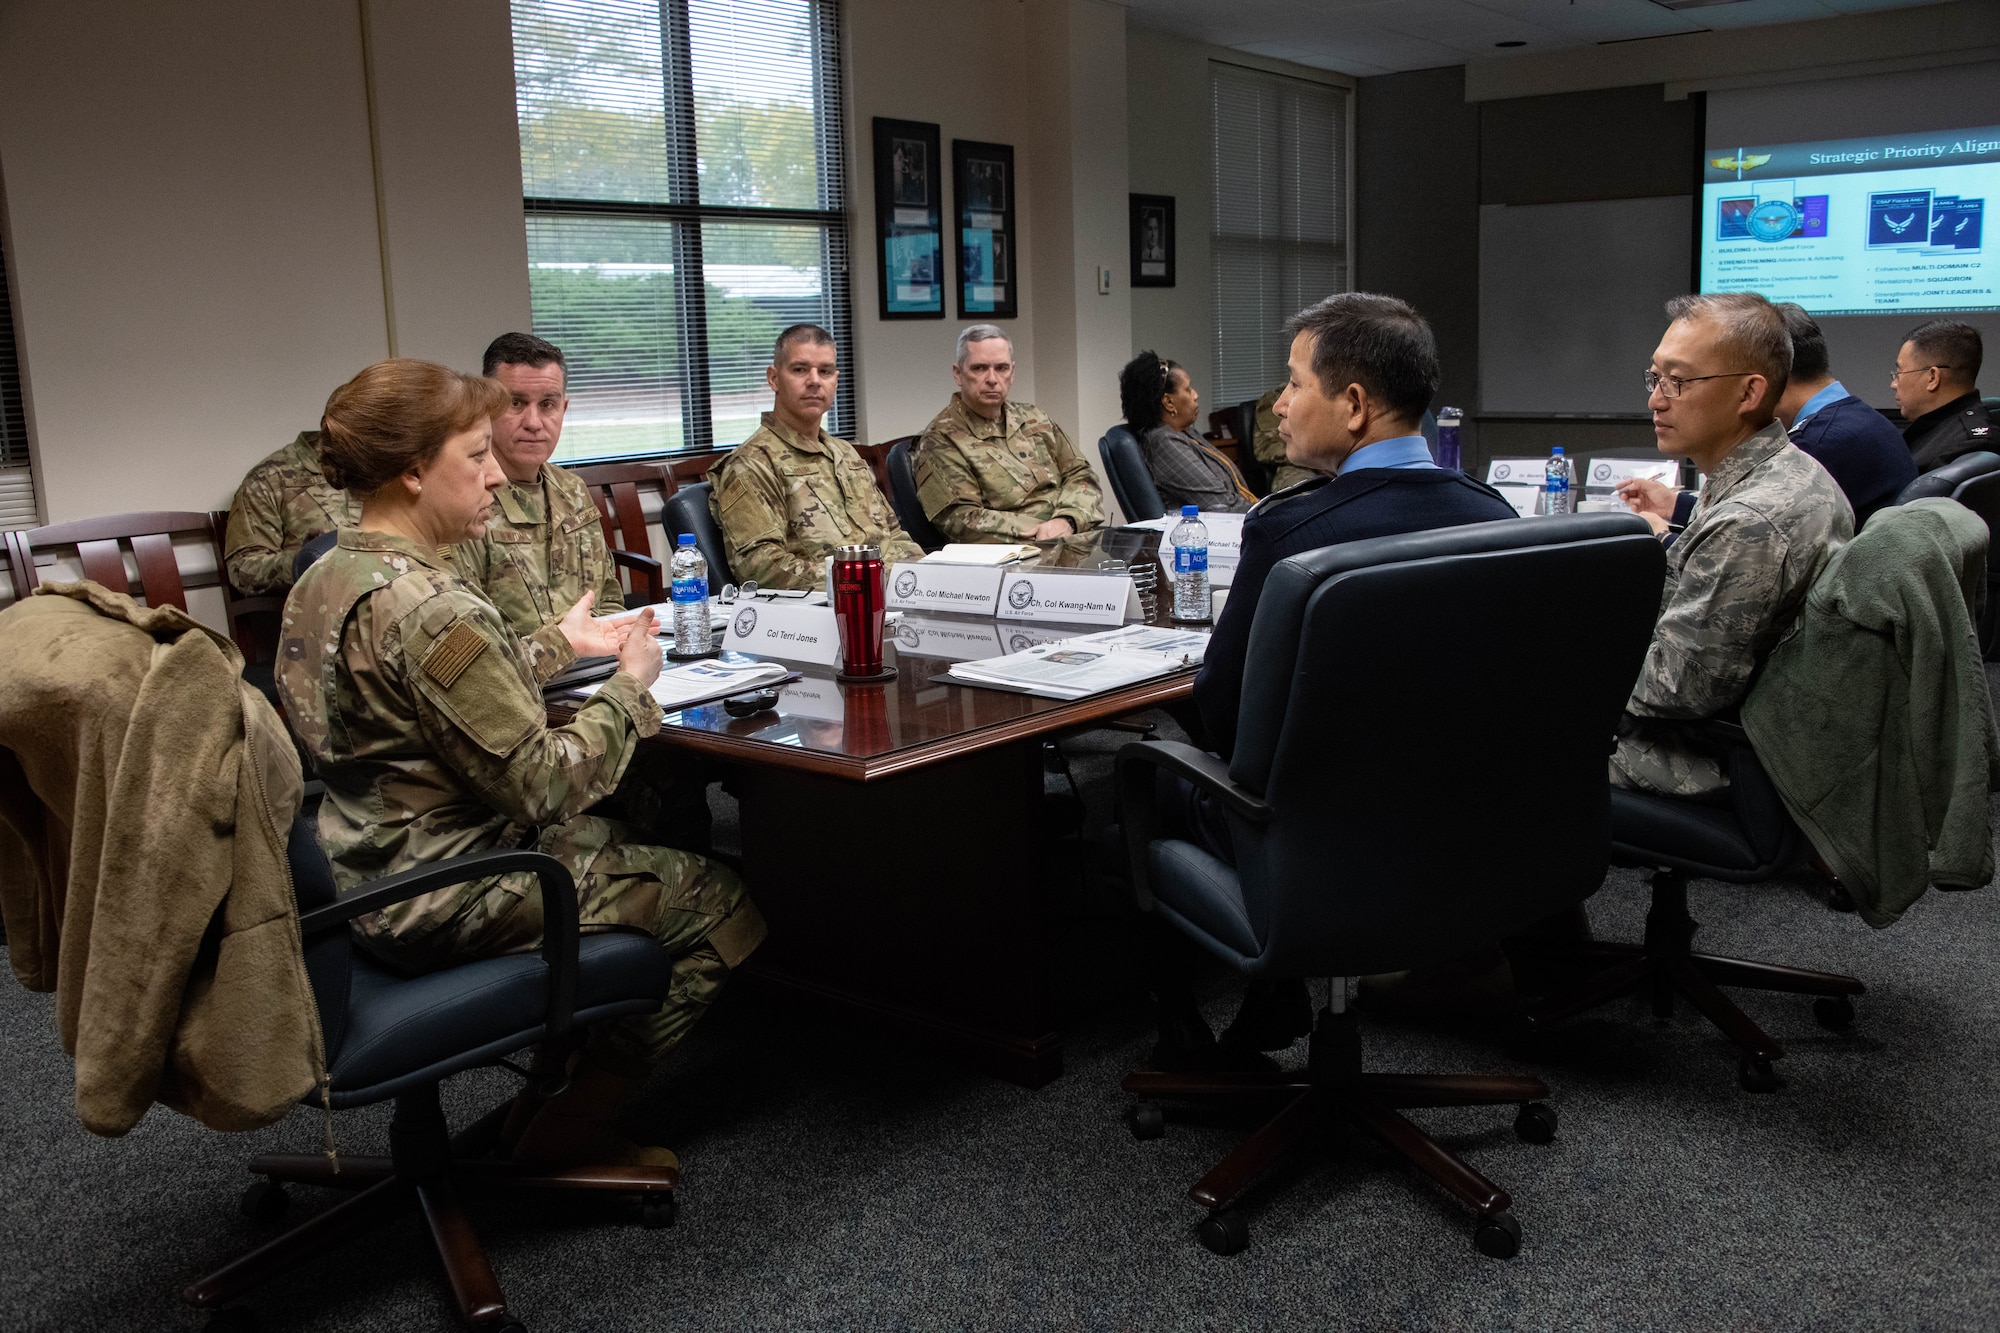 Col. Terri Jones, the Eaker Center for Leadership Development commander, discusses the Eaker Center’s role in developing Air Force leaders with members of the Republic of Korea Air Force Chaplain Corps during a visit to Air University Nov. 14, 2019, at Maxwell, Air Force Base, Alabama. Jones also expounded on the Air Force Chaplain Corps College task of providing initial and continuing skill-set training and education for Chaplain Corps personnel at key milestones in their careers.